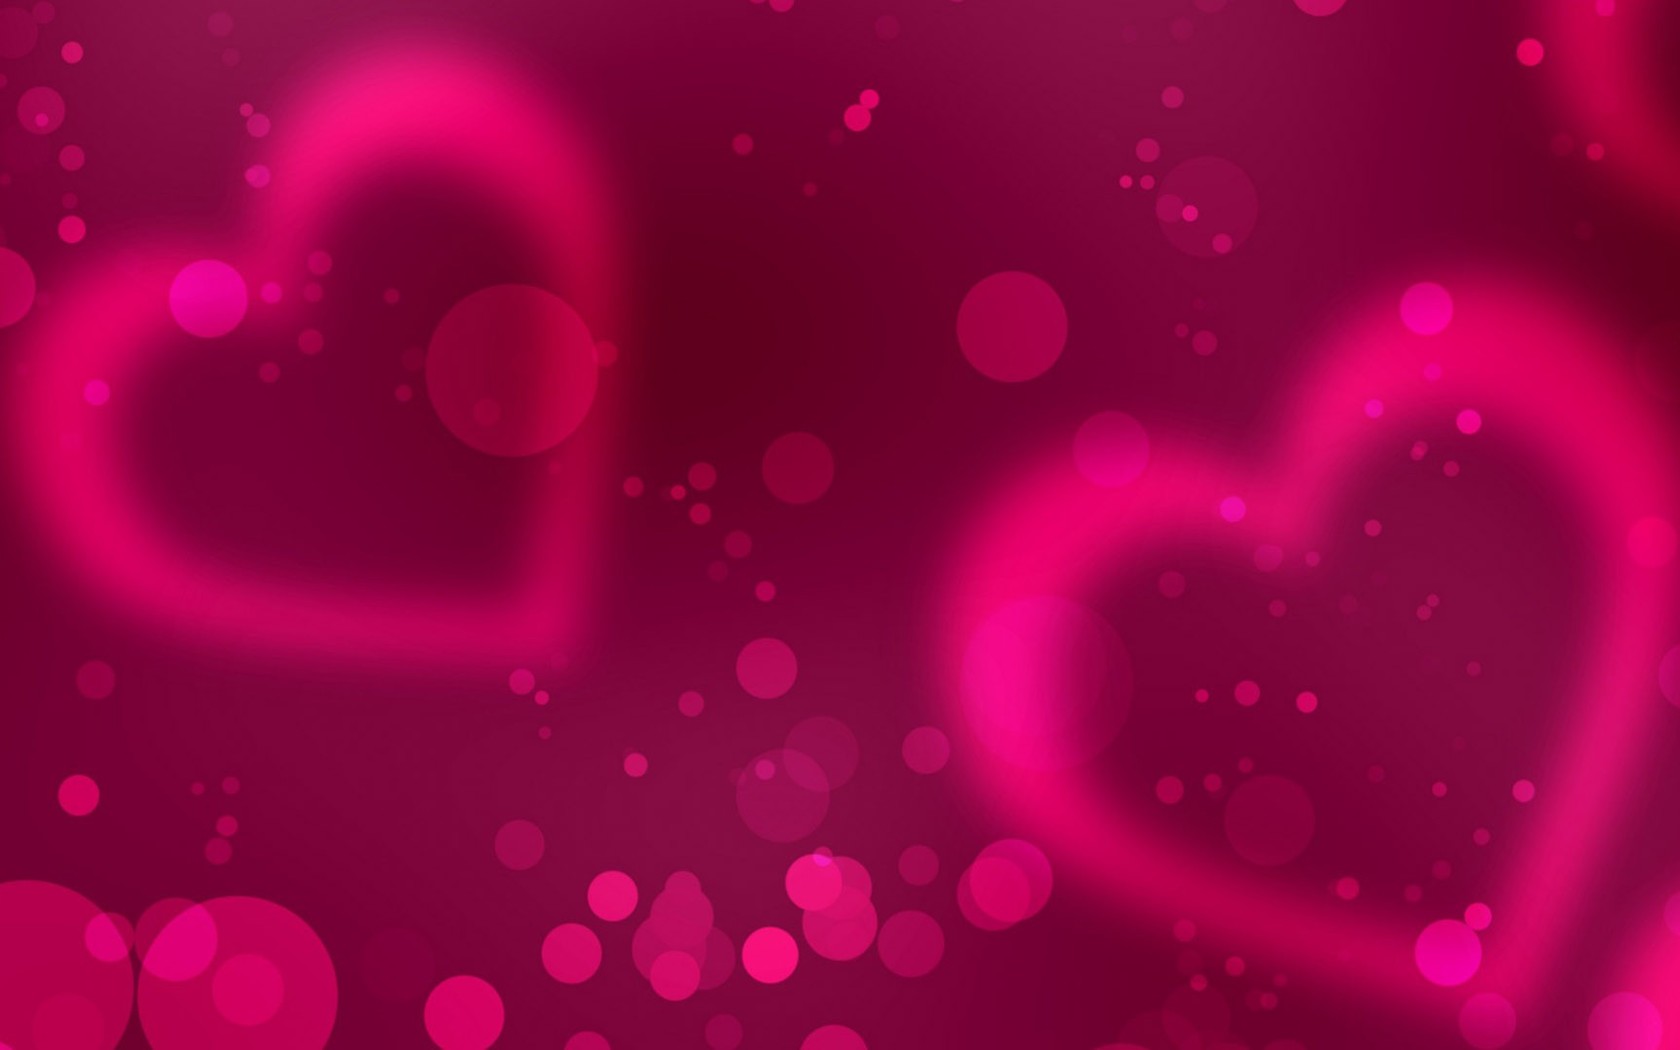 30000 Pink Heart Pictures  Download Free Images on Unsplash